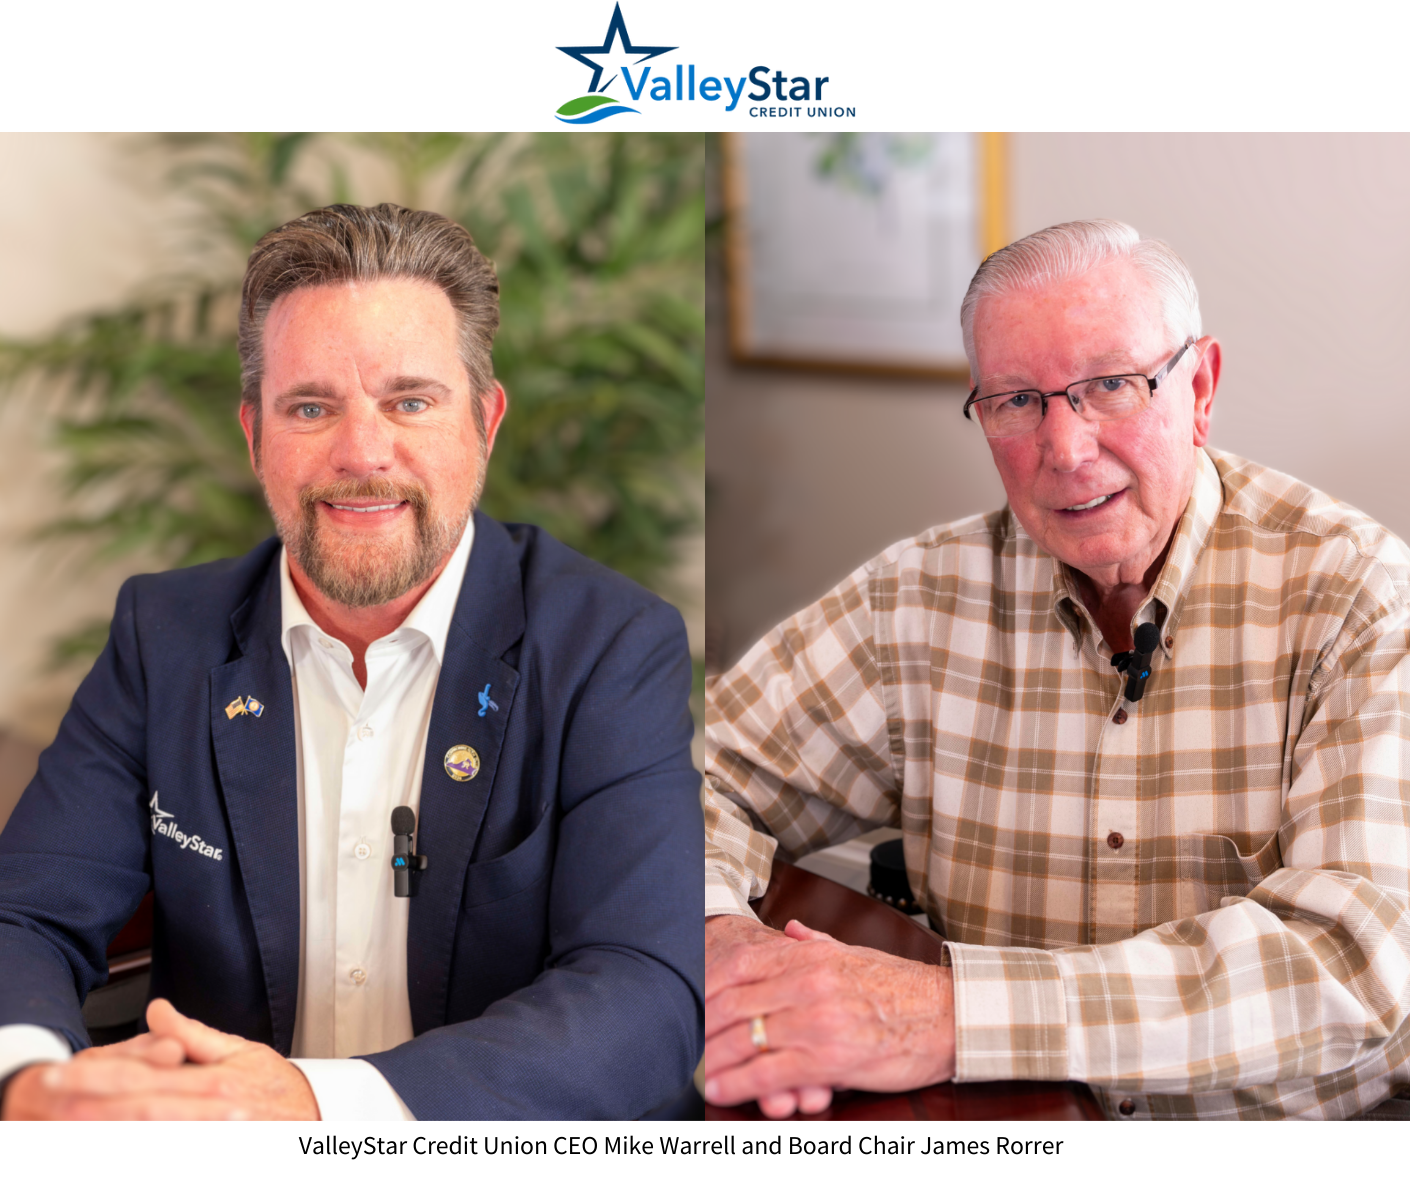 ValleyStar Credit Union CEO Mike Warrell and Board Chair James Rorrer